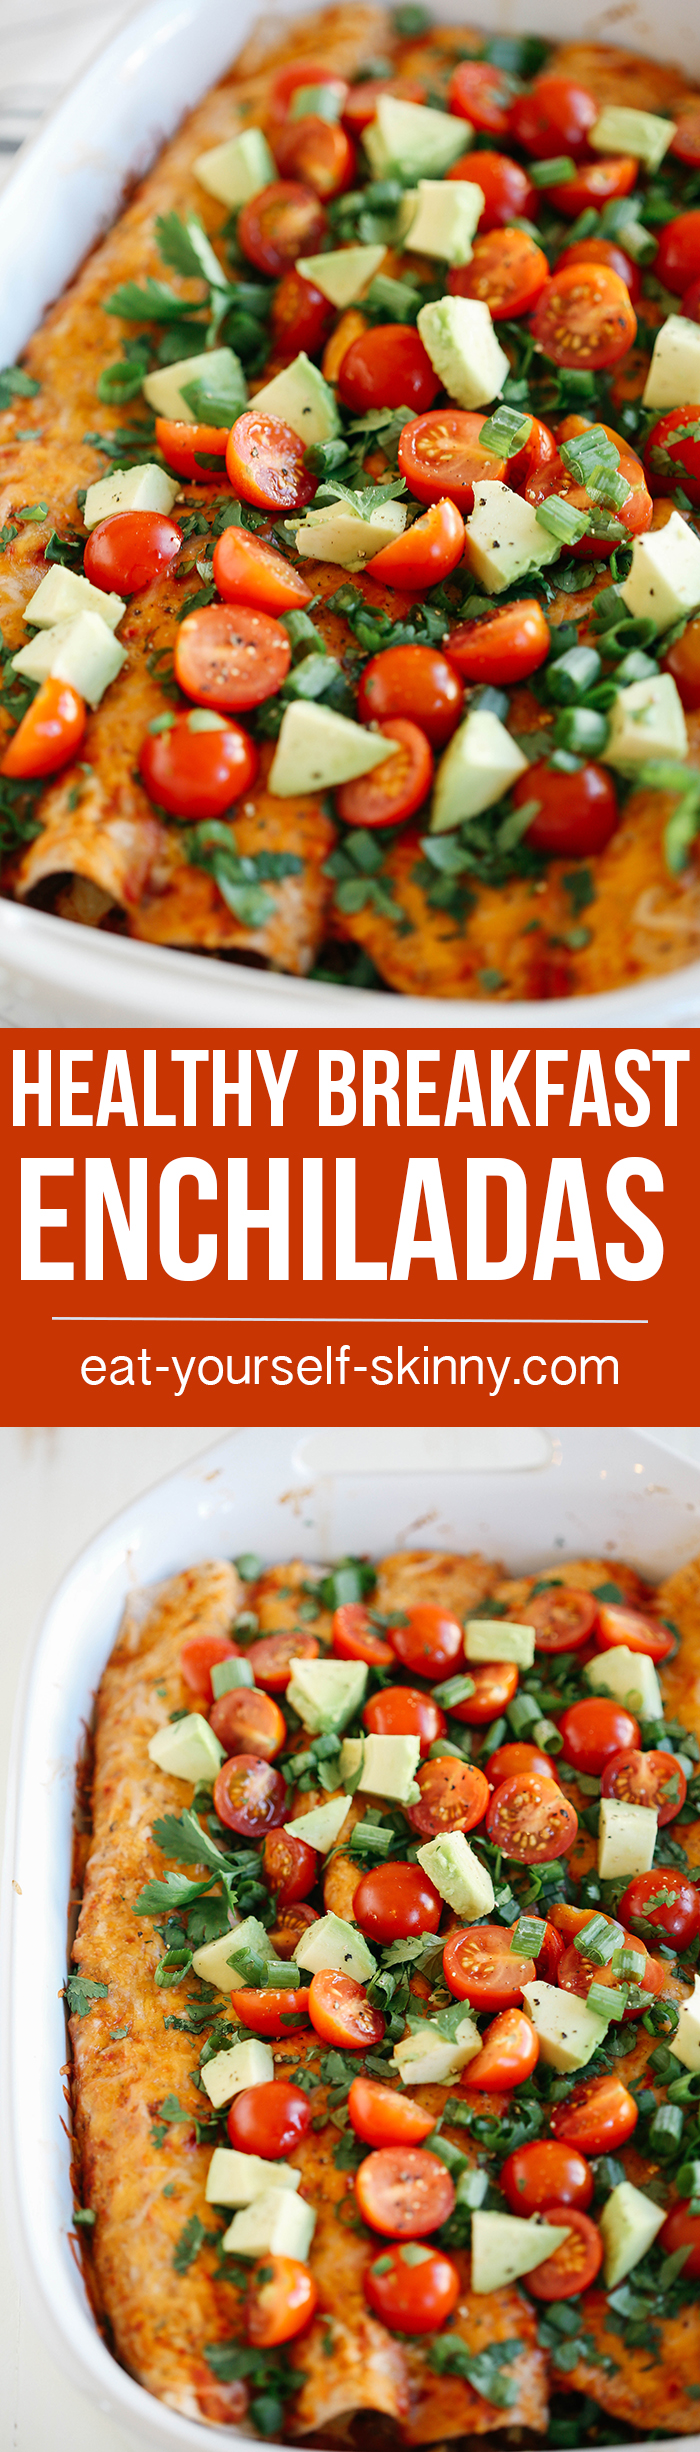 Healthy Breakfast Enchiladas that are cheesy, spicy and full of so much flavor and can easily be prepped ahead of time for a quick delicious breakfast!